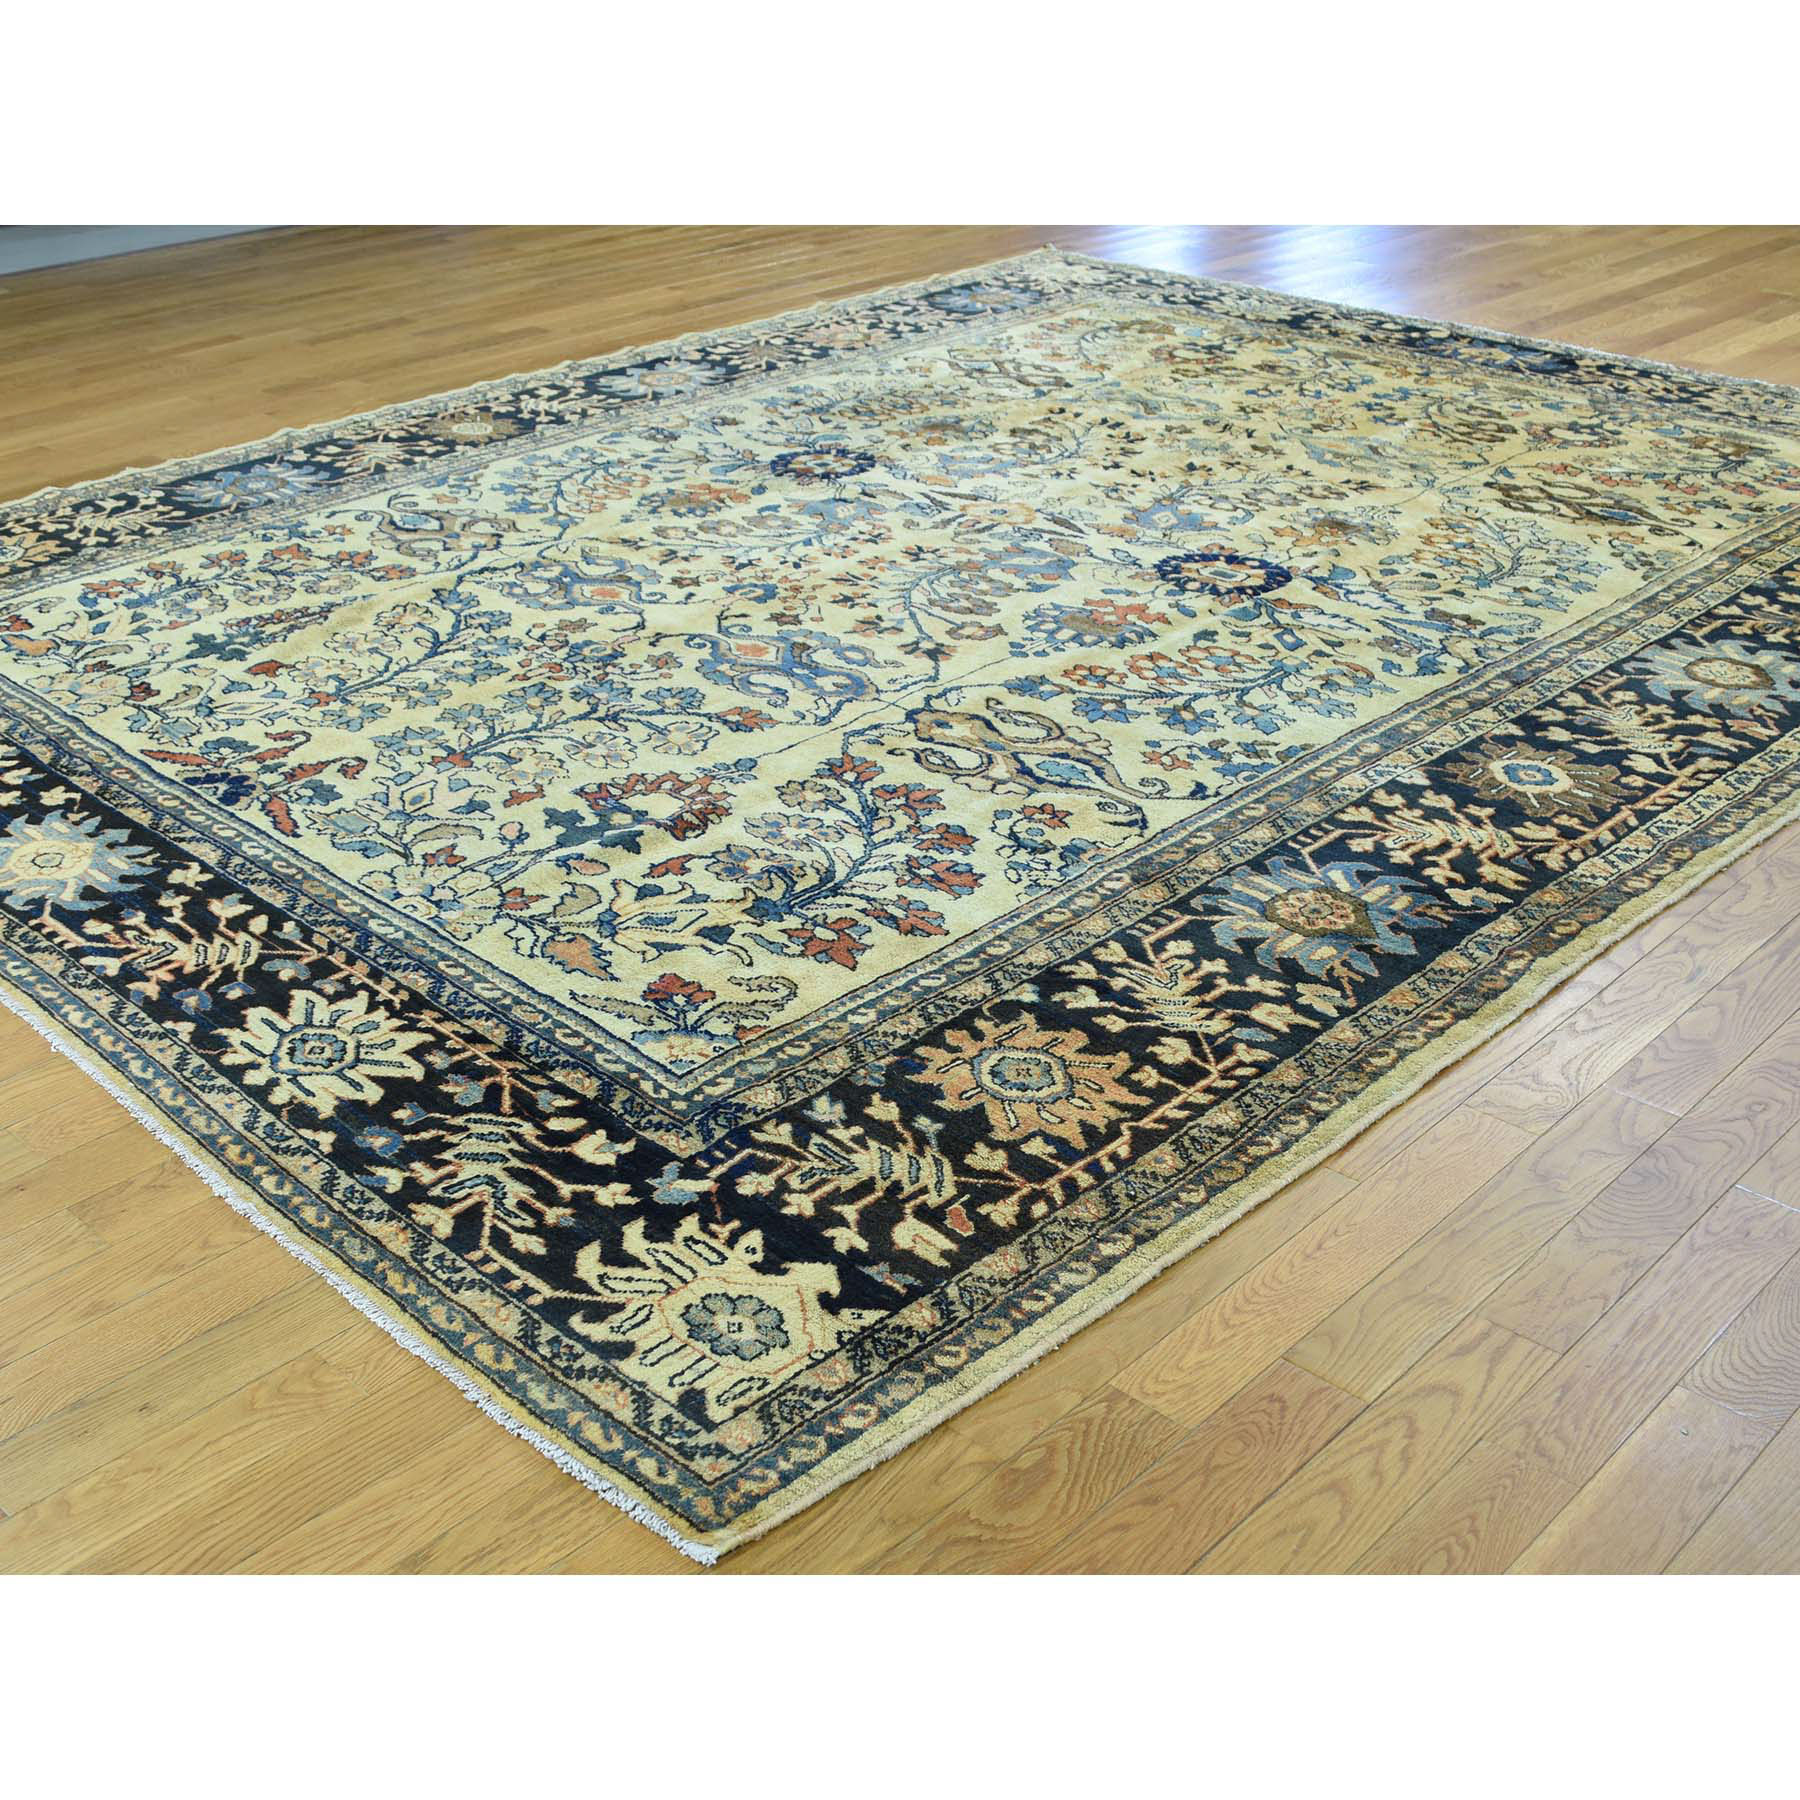 9'4"x11'10" Hand Made Antique Persian Lilihan Mint Cond Full Pile Rug 